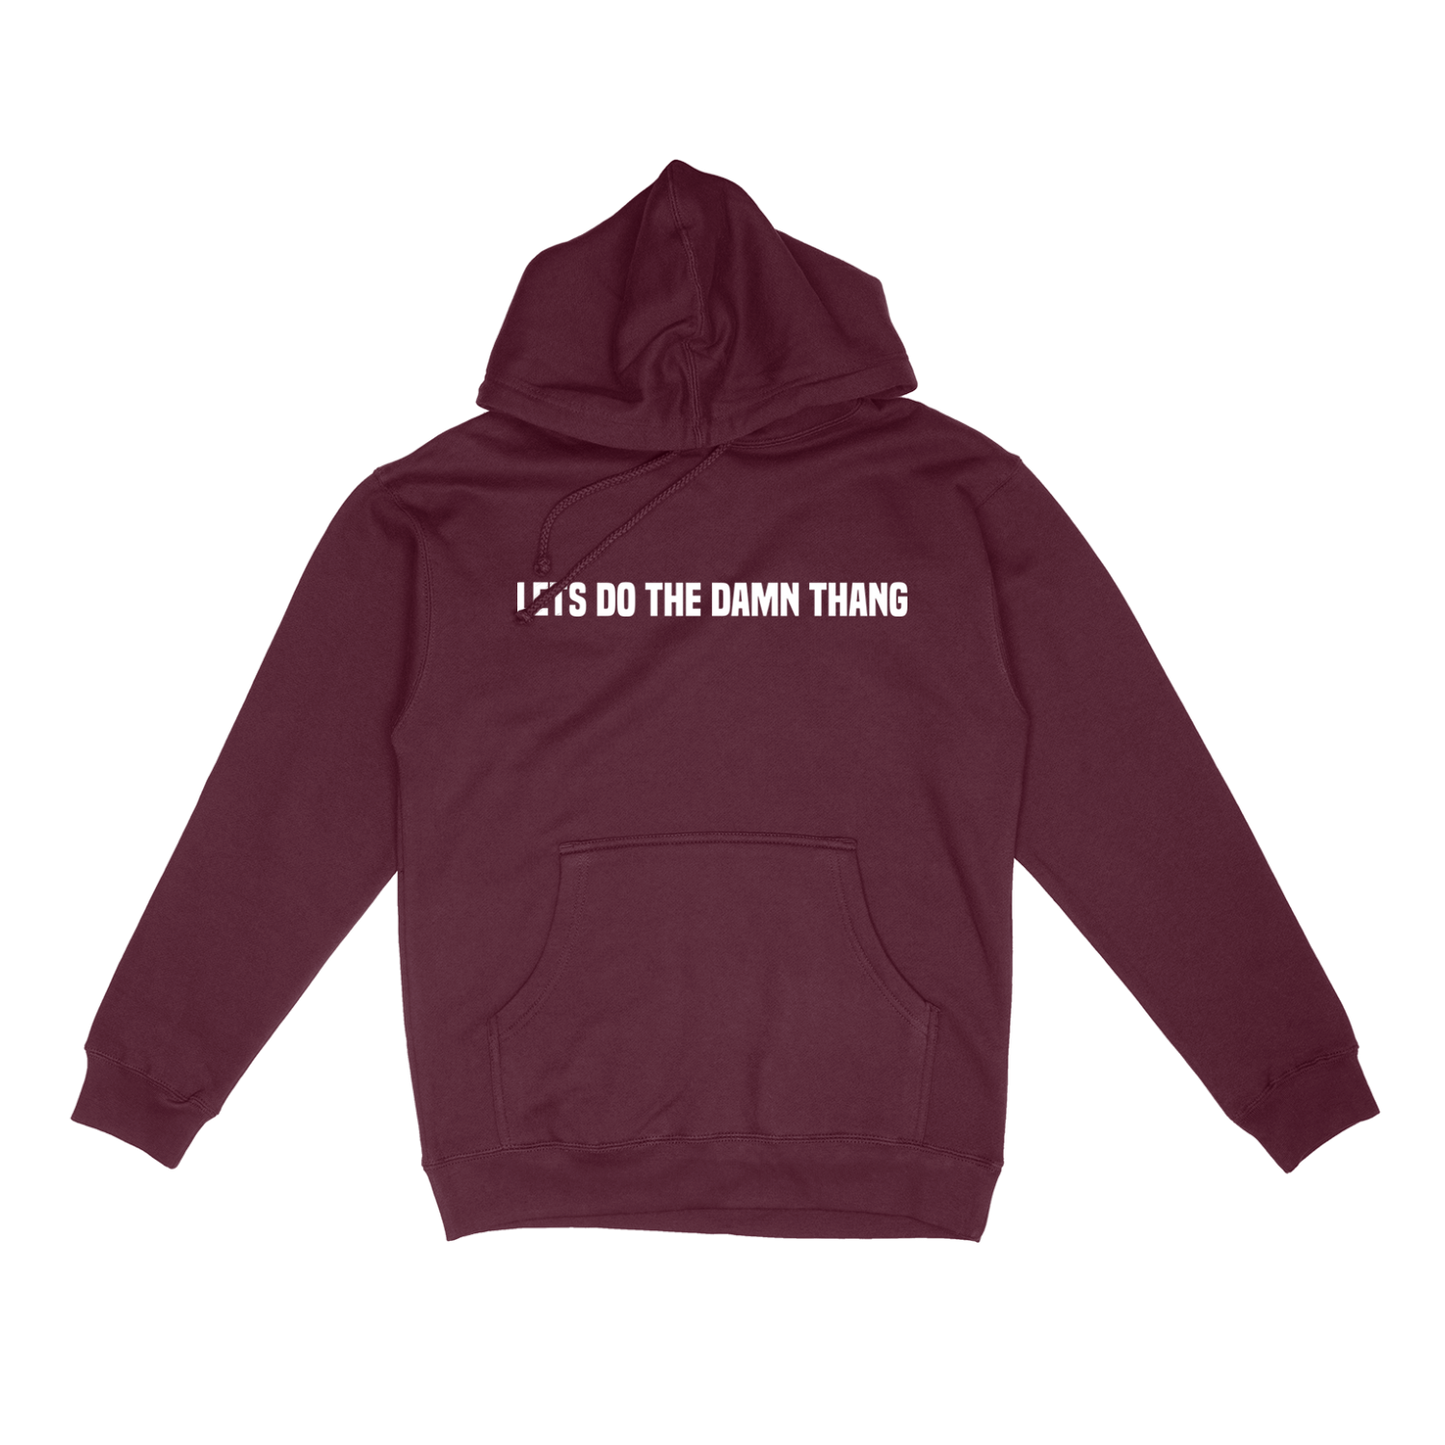 "LETS DO THE DAMN THANG" Hoodie